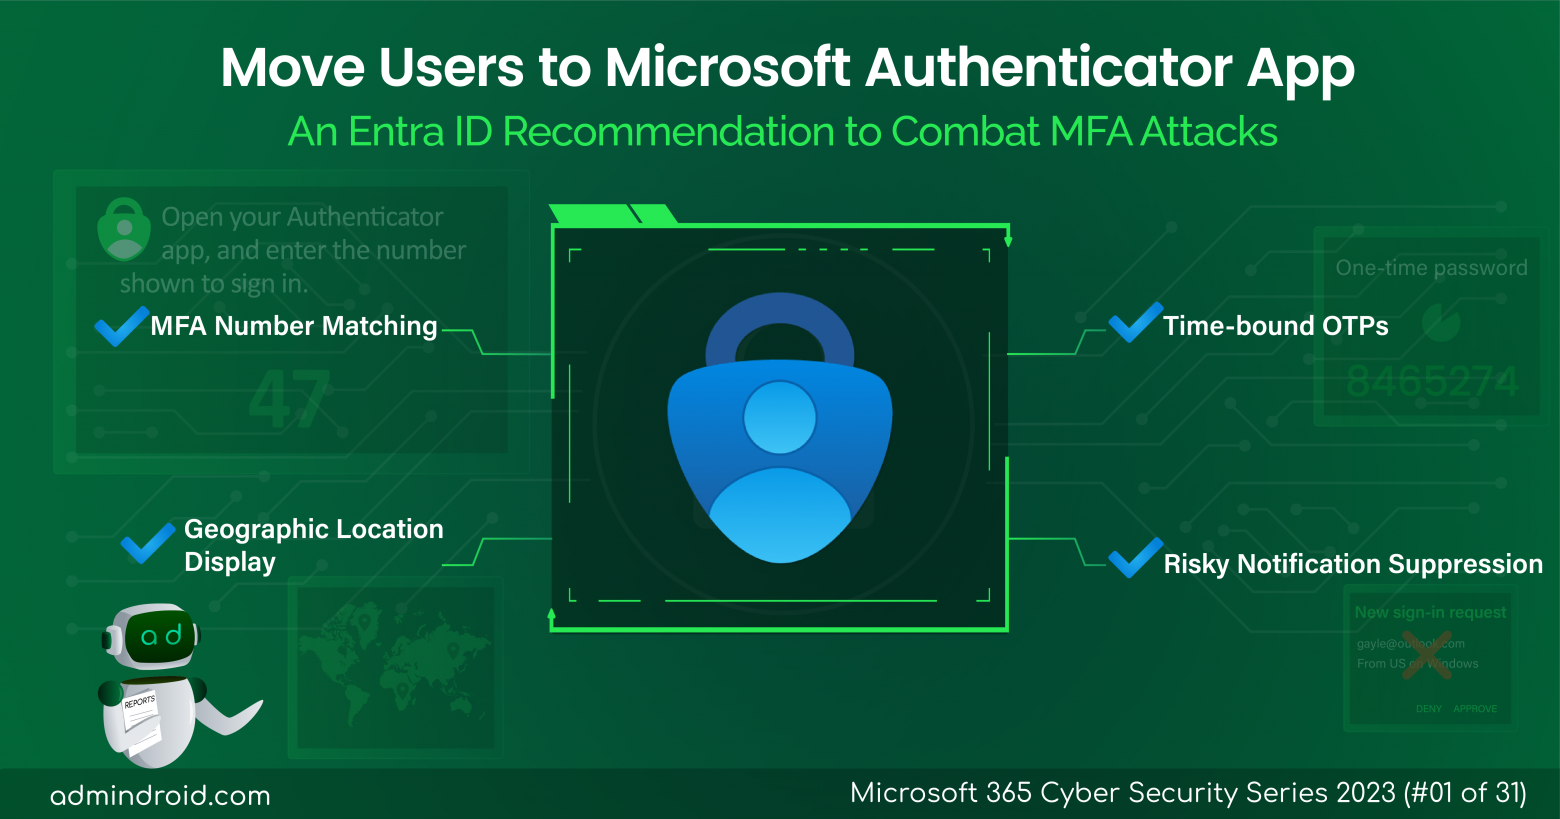 Move Users to Microsoft Authenticator App-An Entra ID Recommendation to Combat MFA Attacks